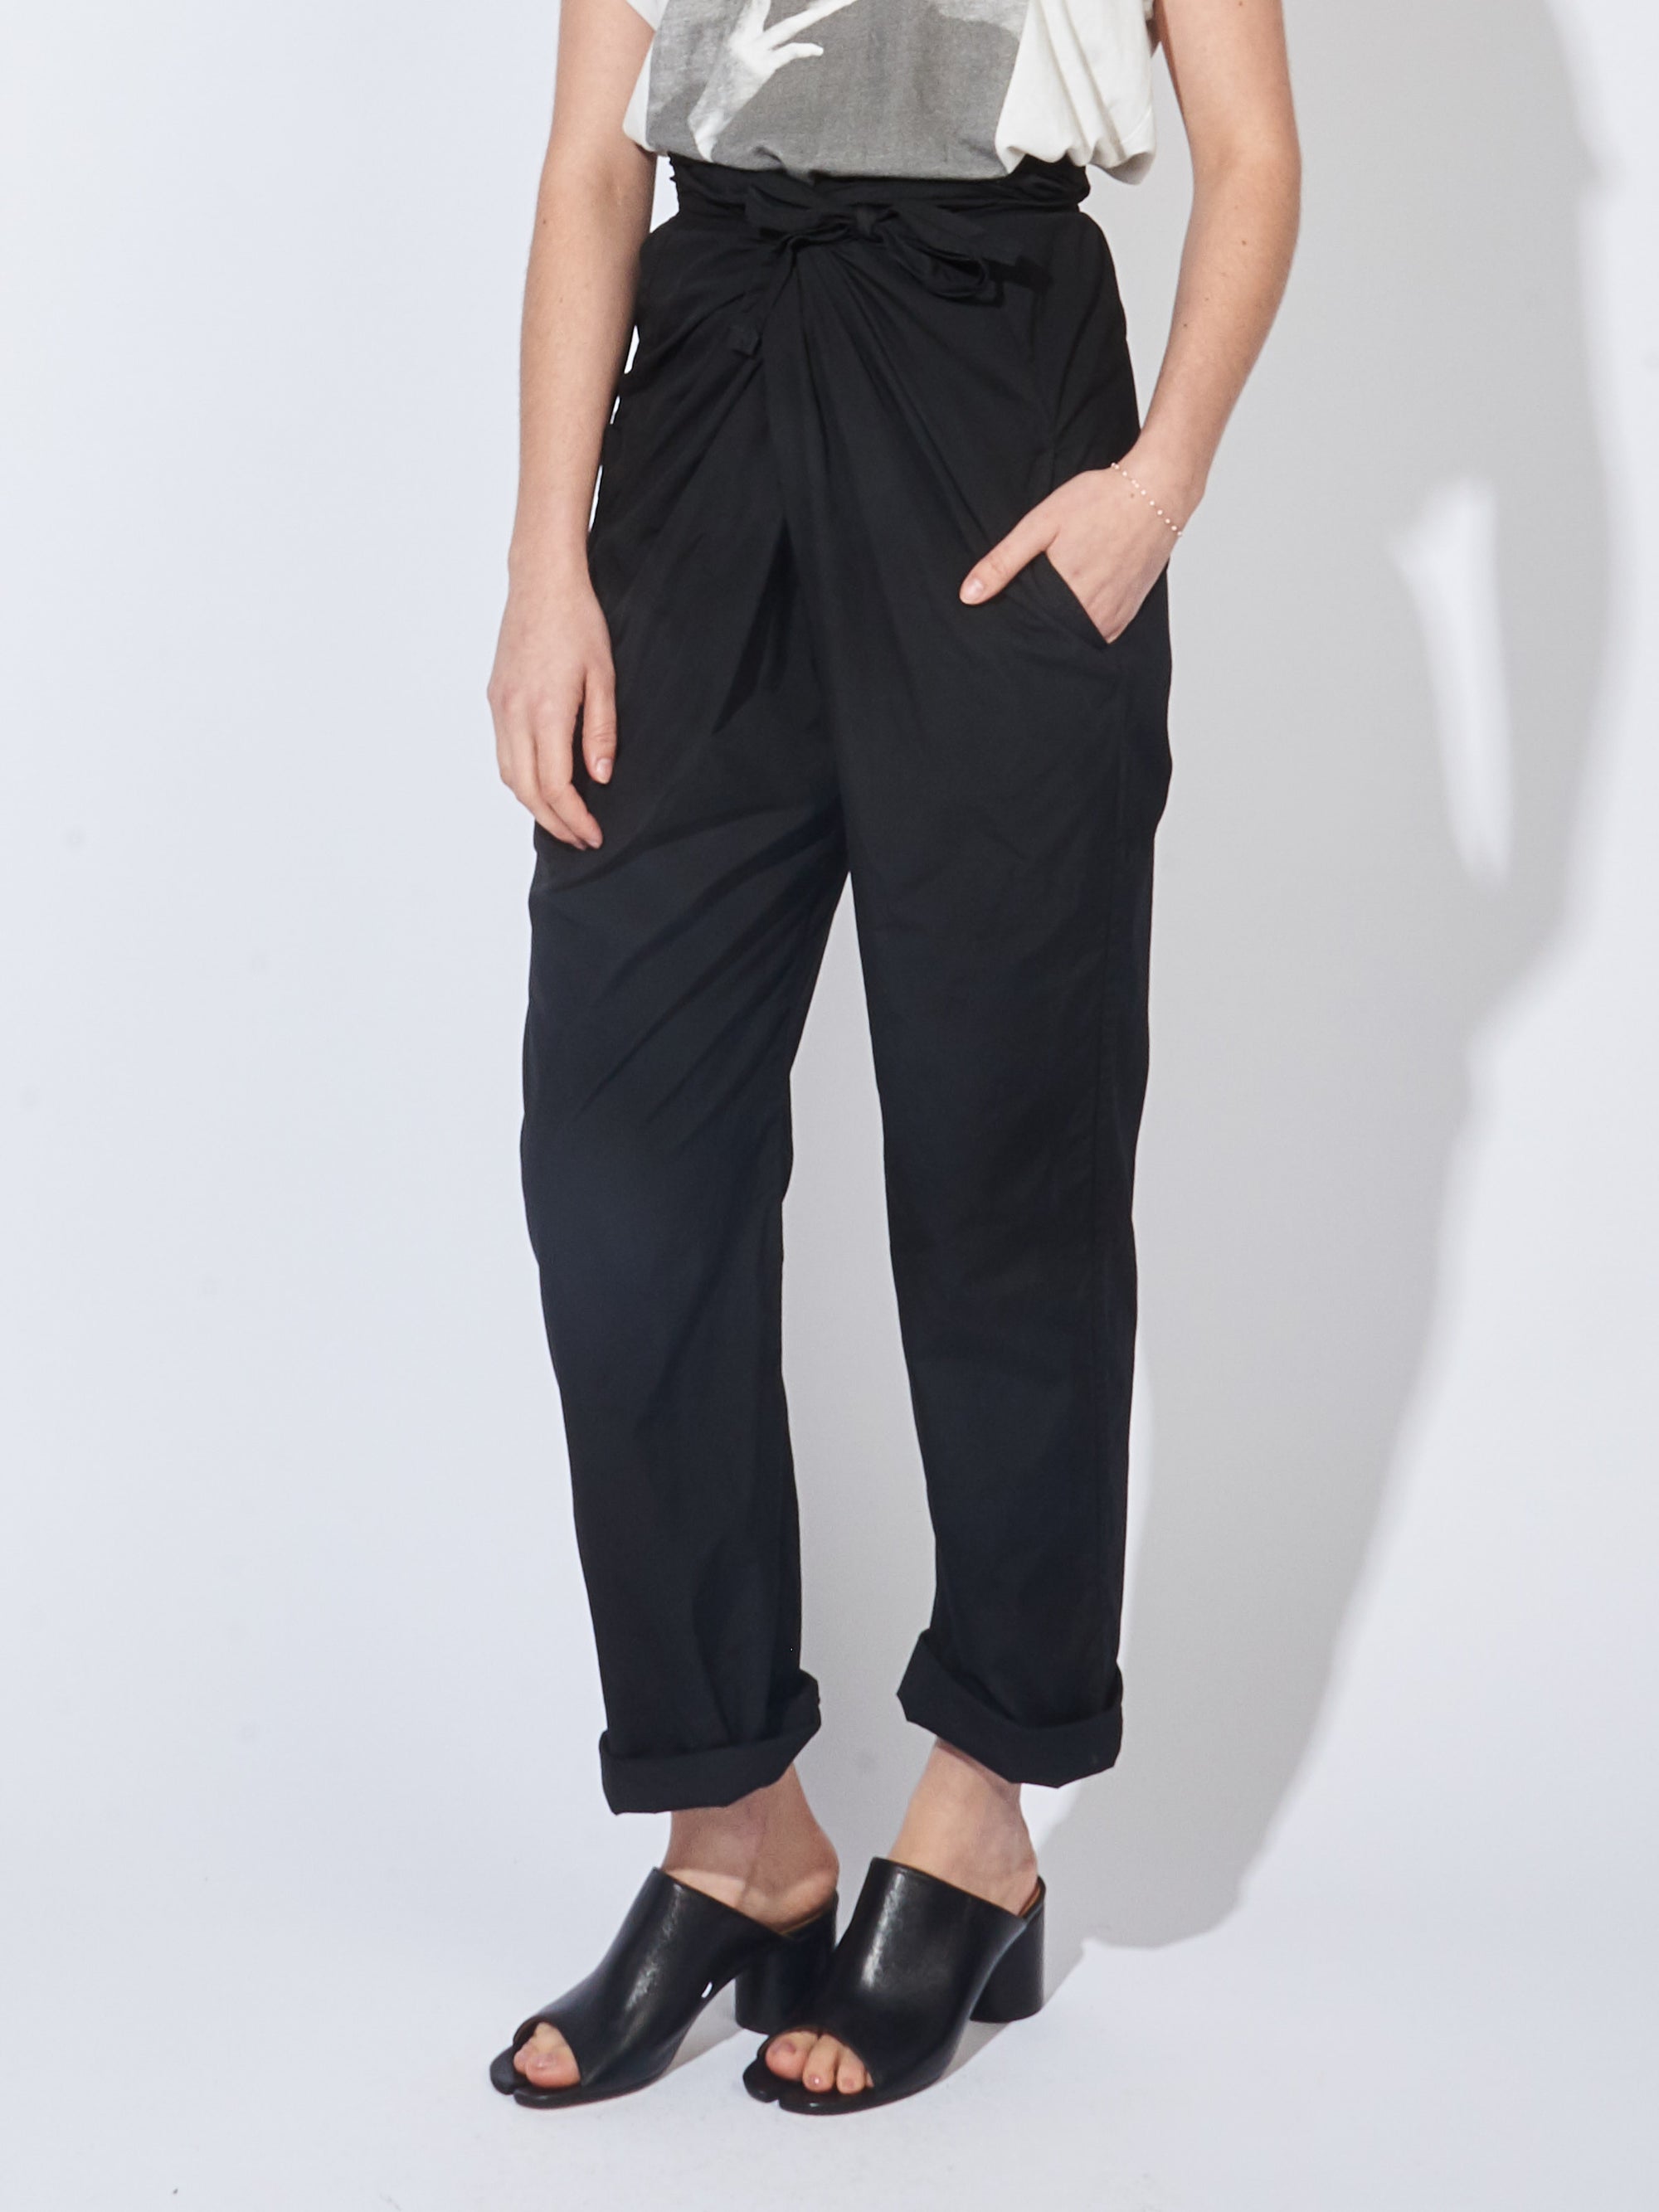 Black Suvin Cotton Broadcloth Wrapped Pants